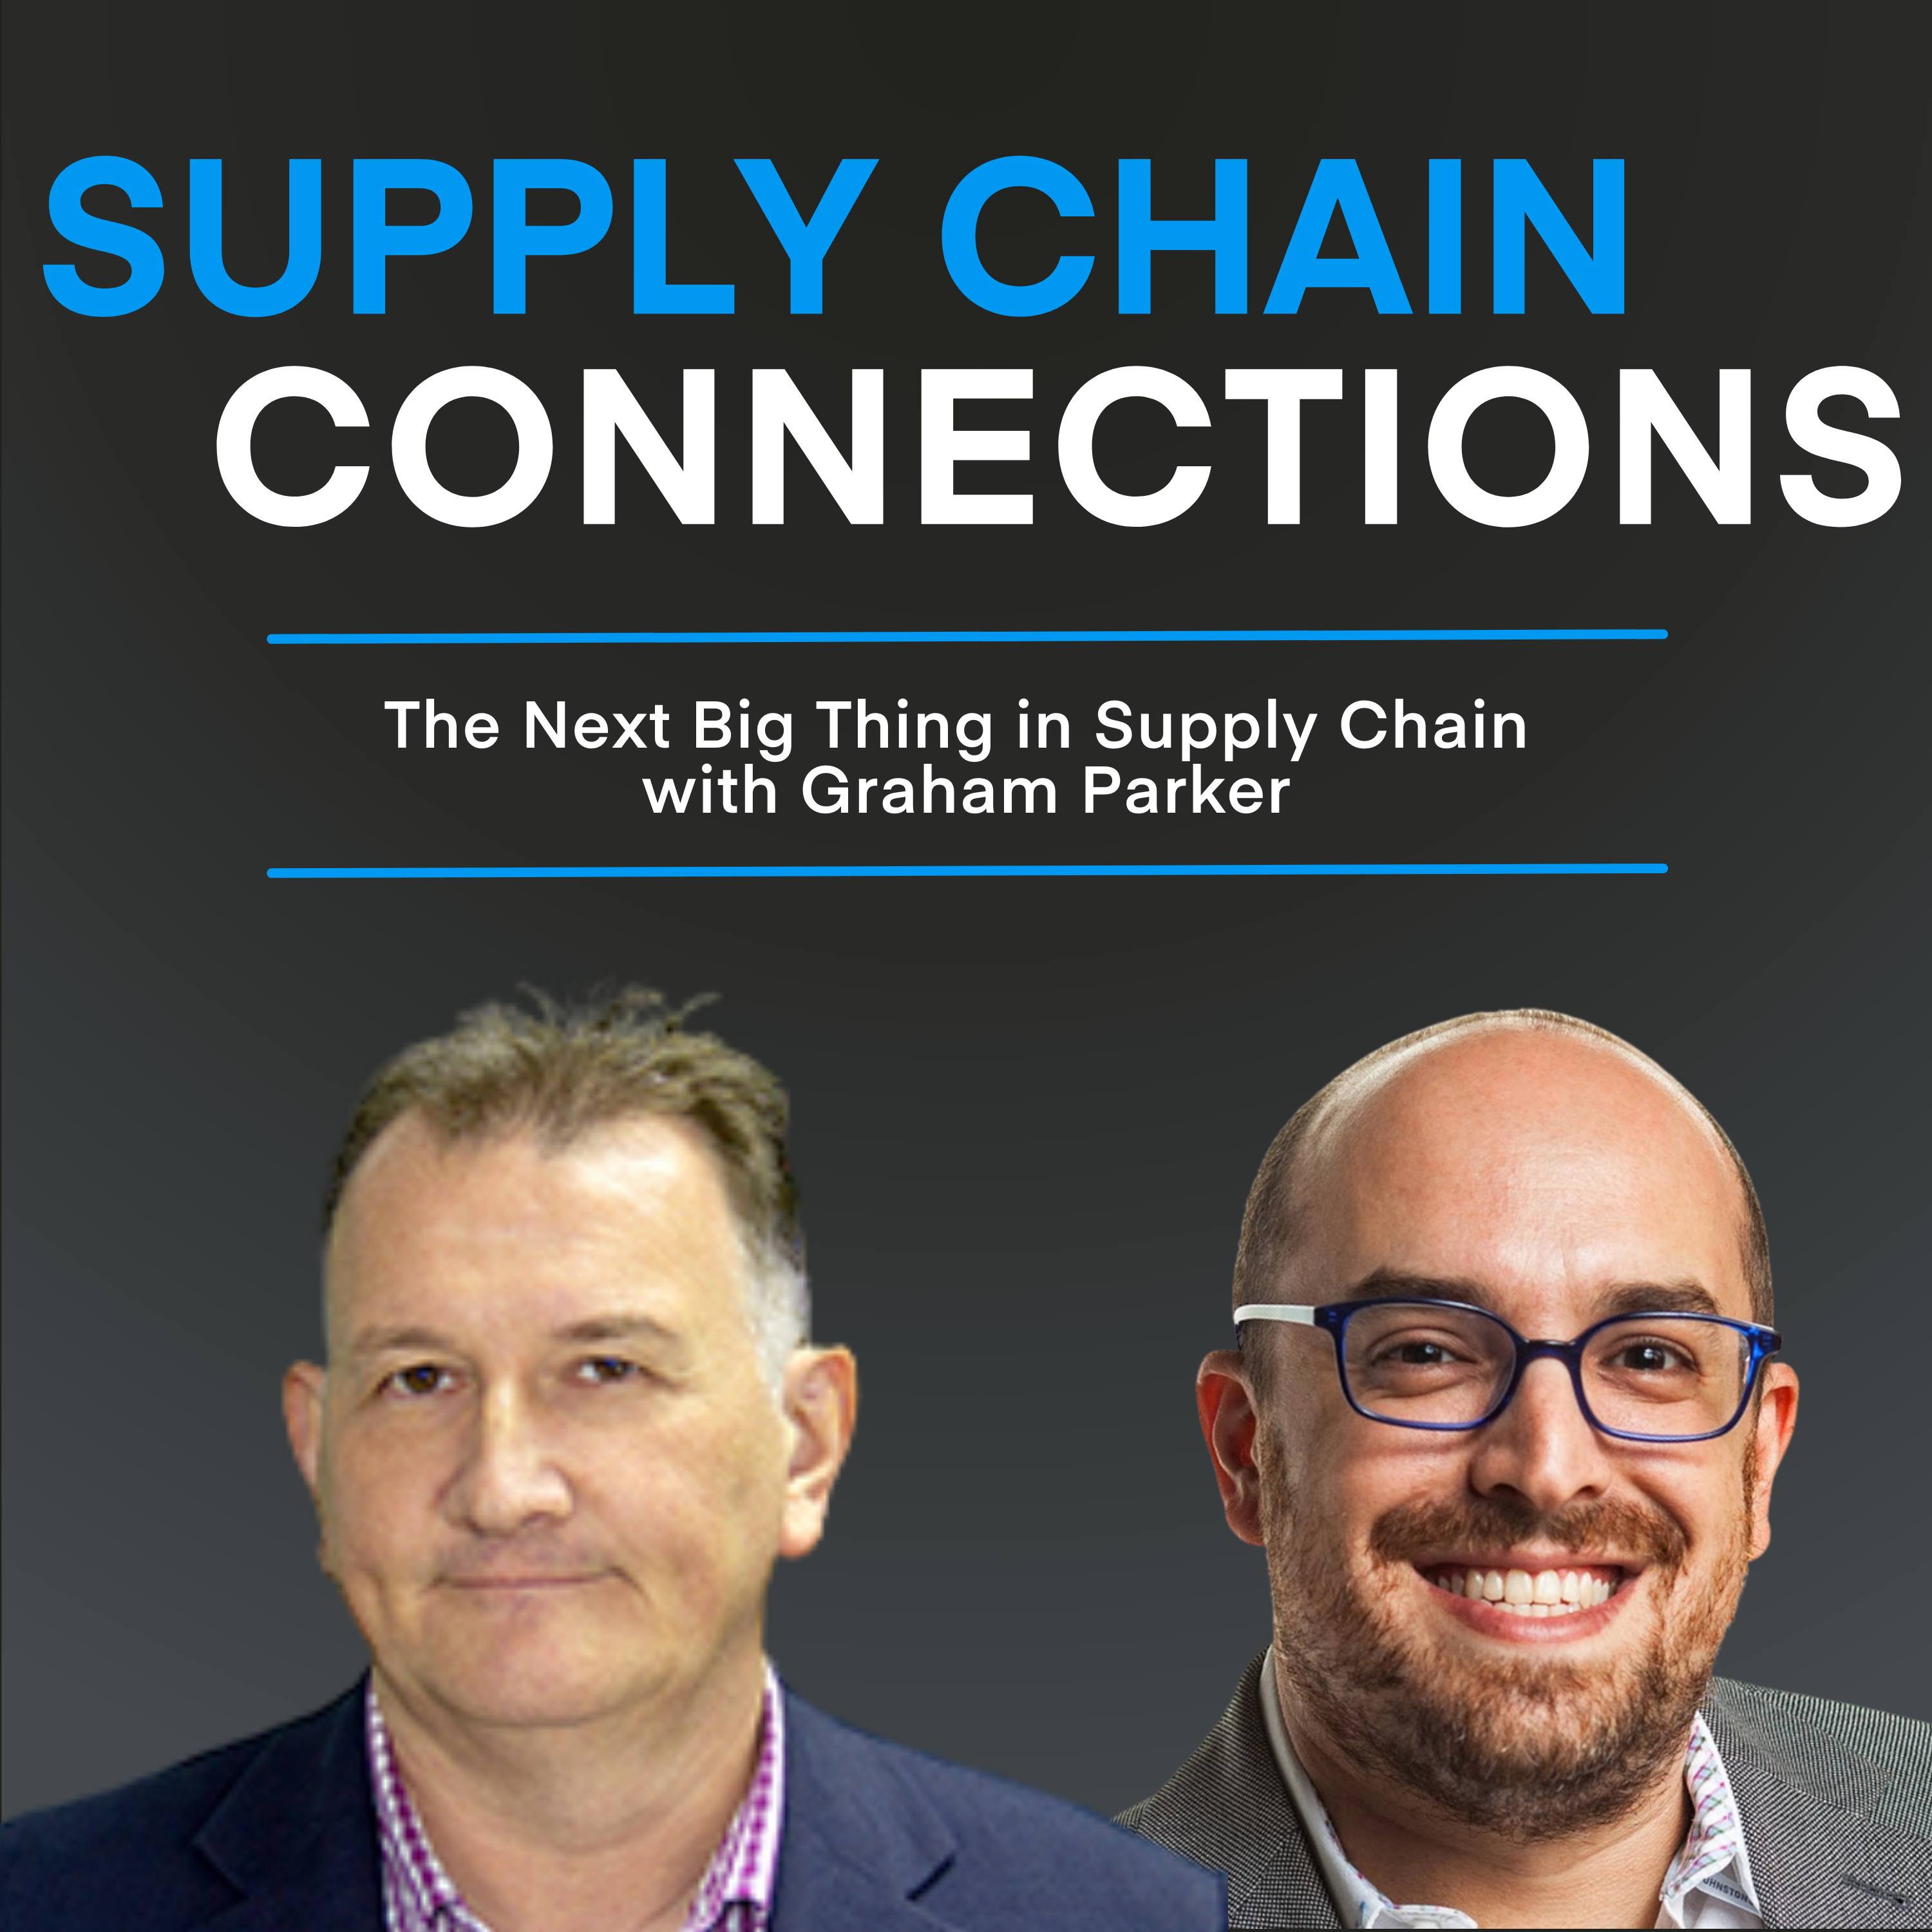 The Next Big Thing in Supply Chain with Graham Parker